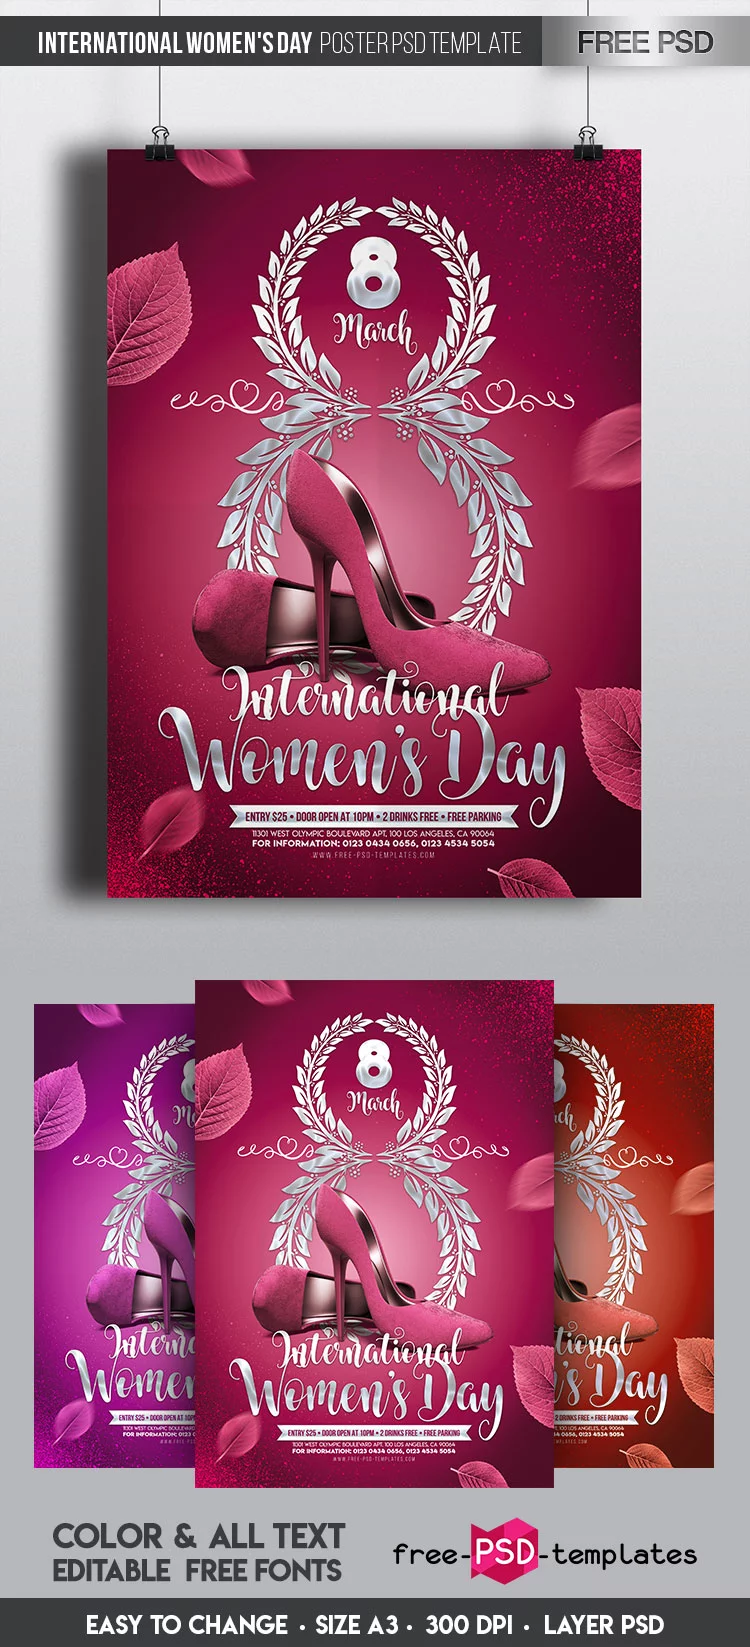 Free International Women’s Day Poster in PSD